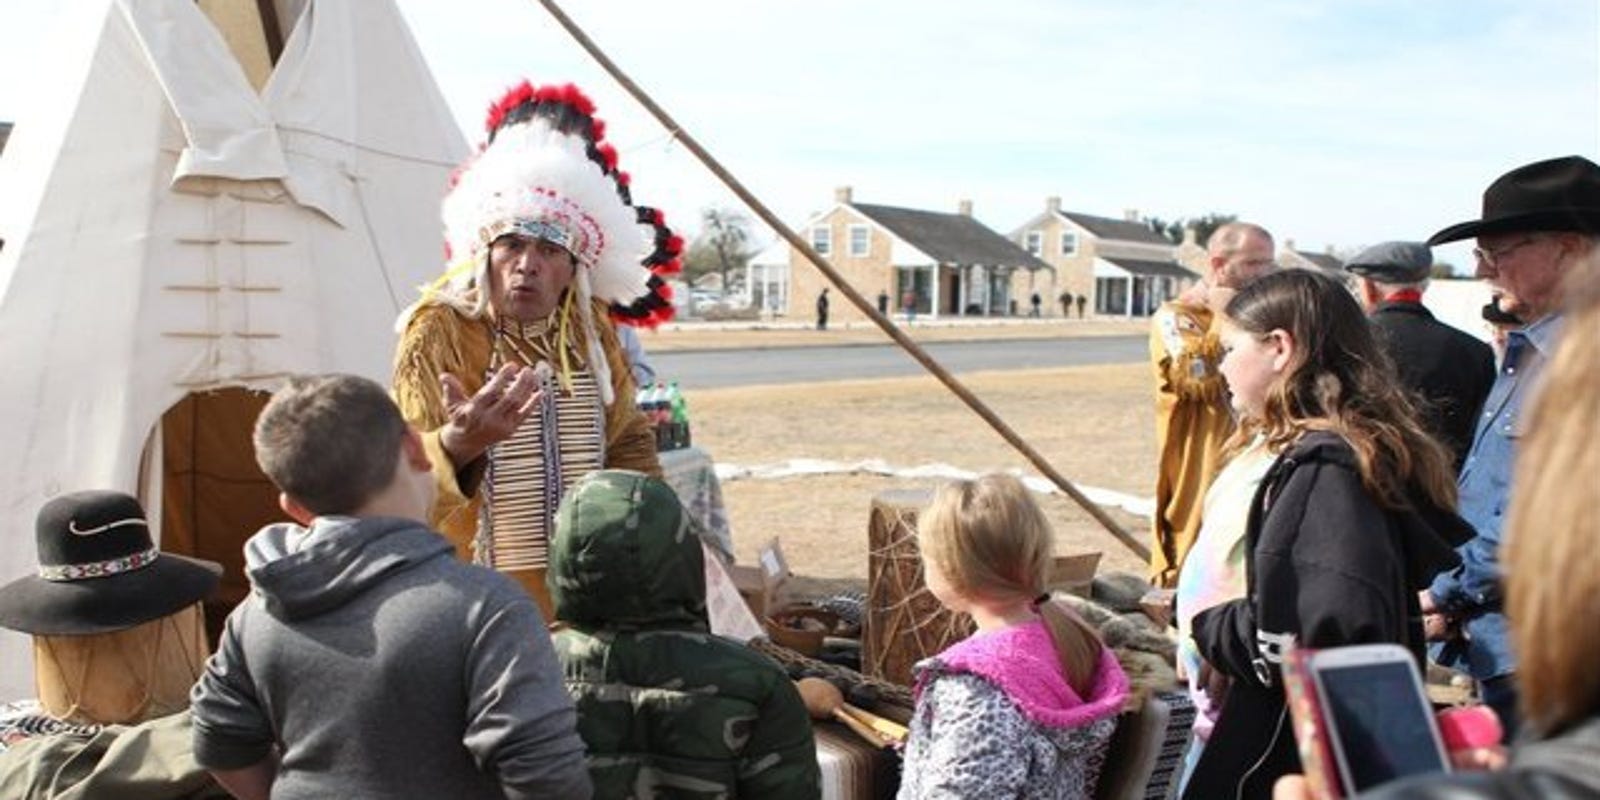 Christmas at Old Fort Concho marking 35th year